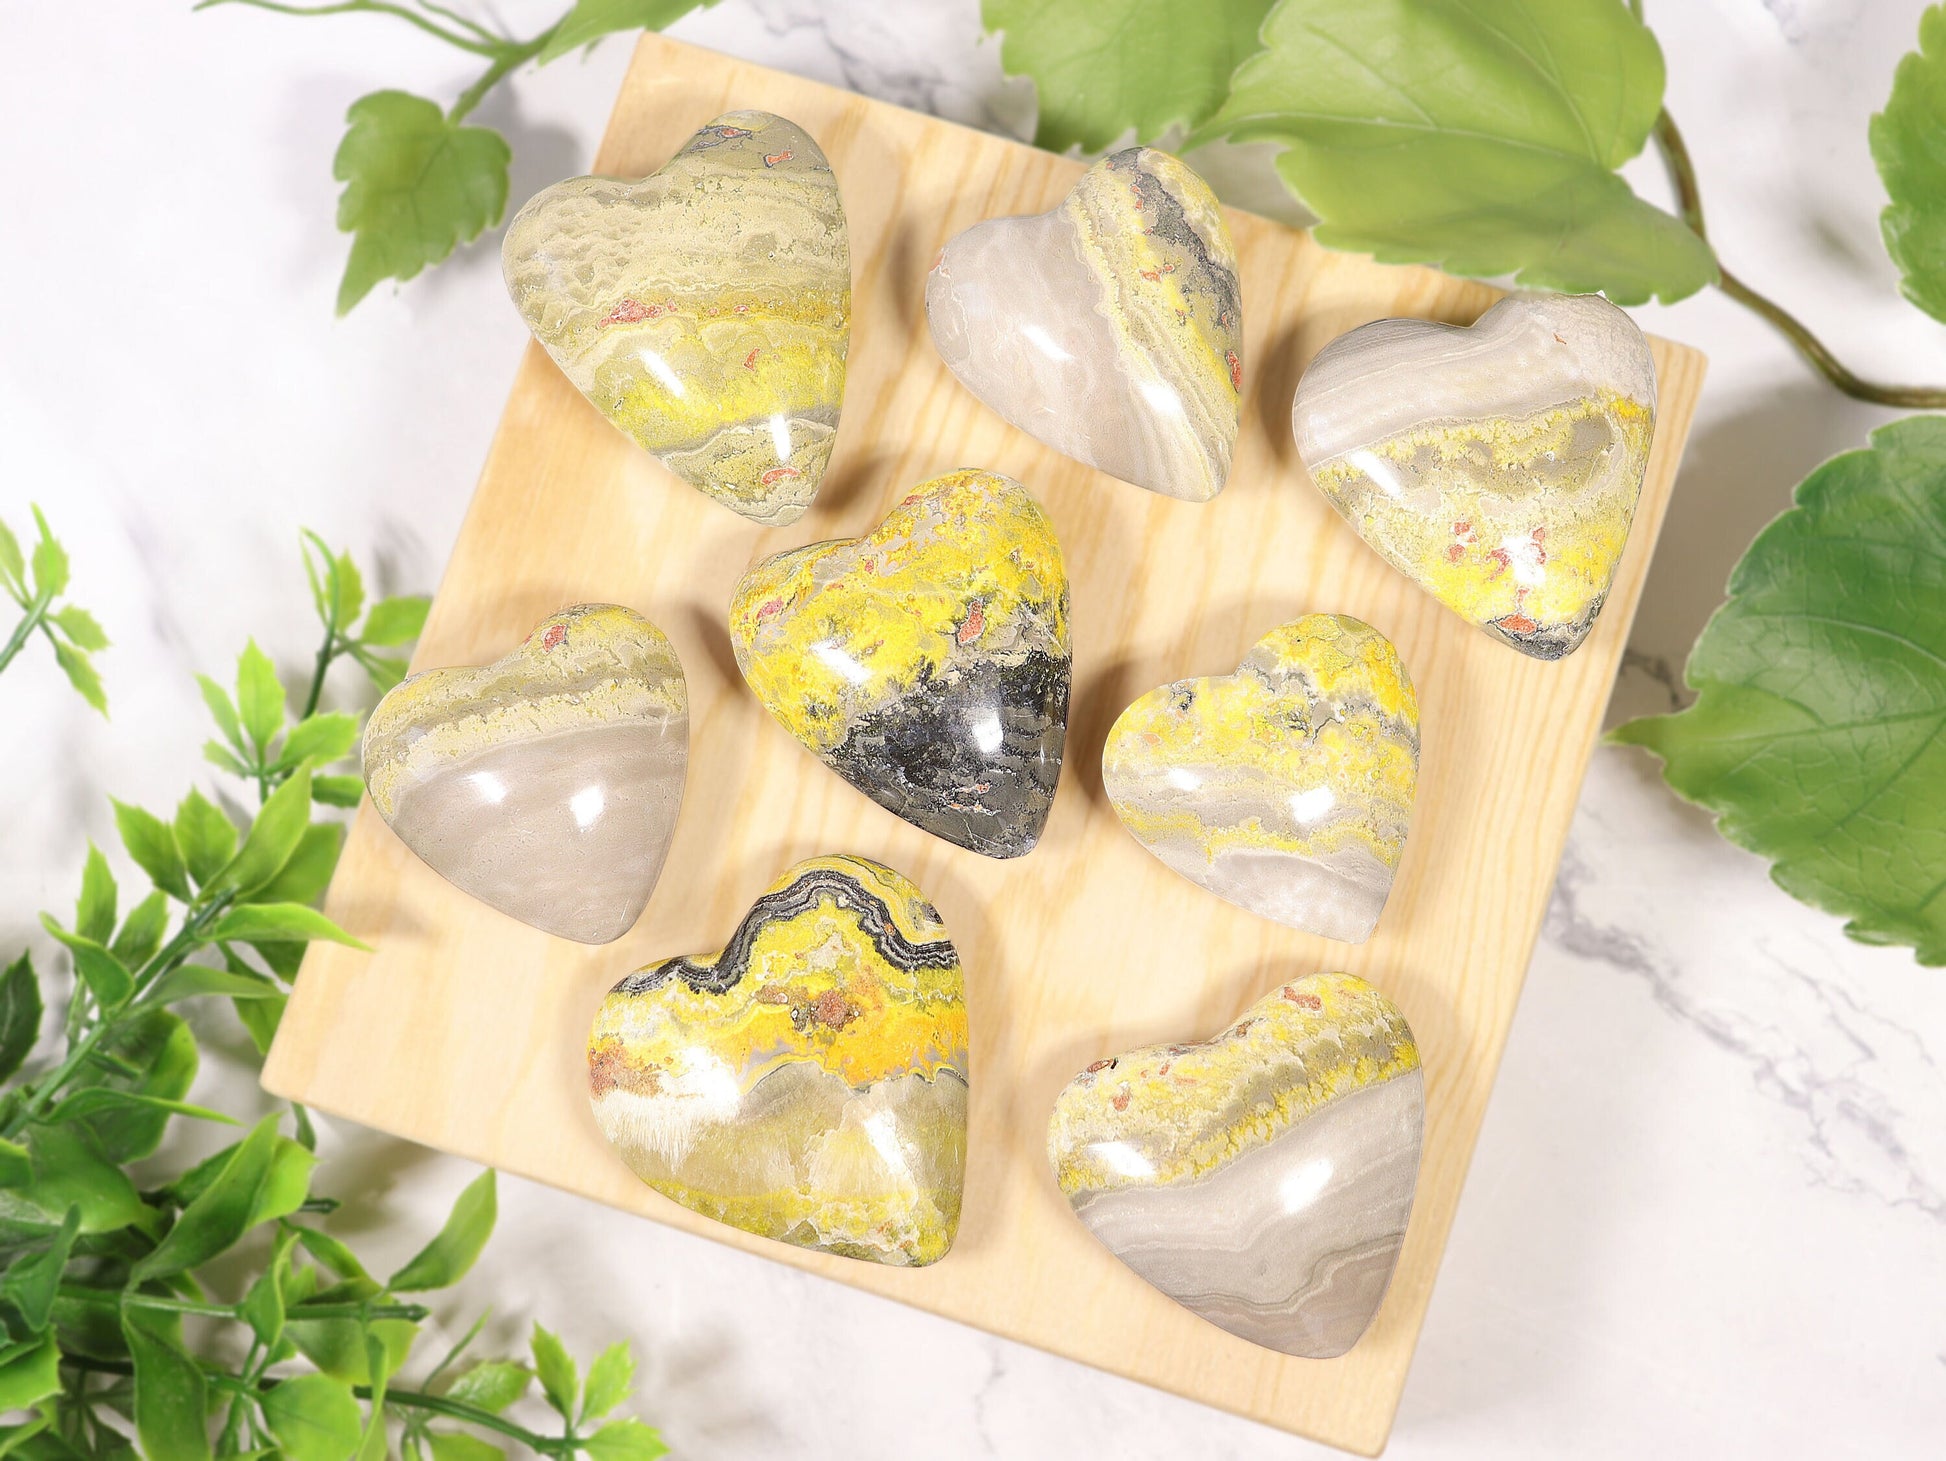 Bumble Bee Jasper, Crystal Heart, Natural Polished Gemstone, Ethically Sourced